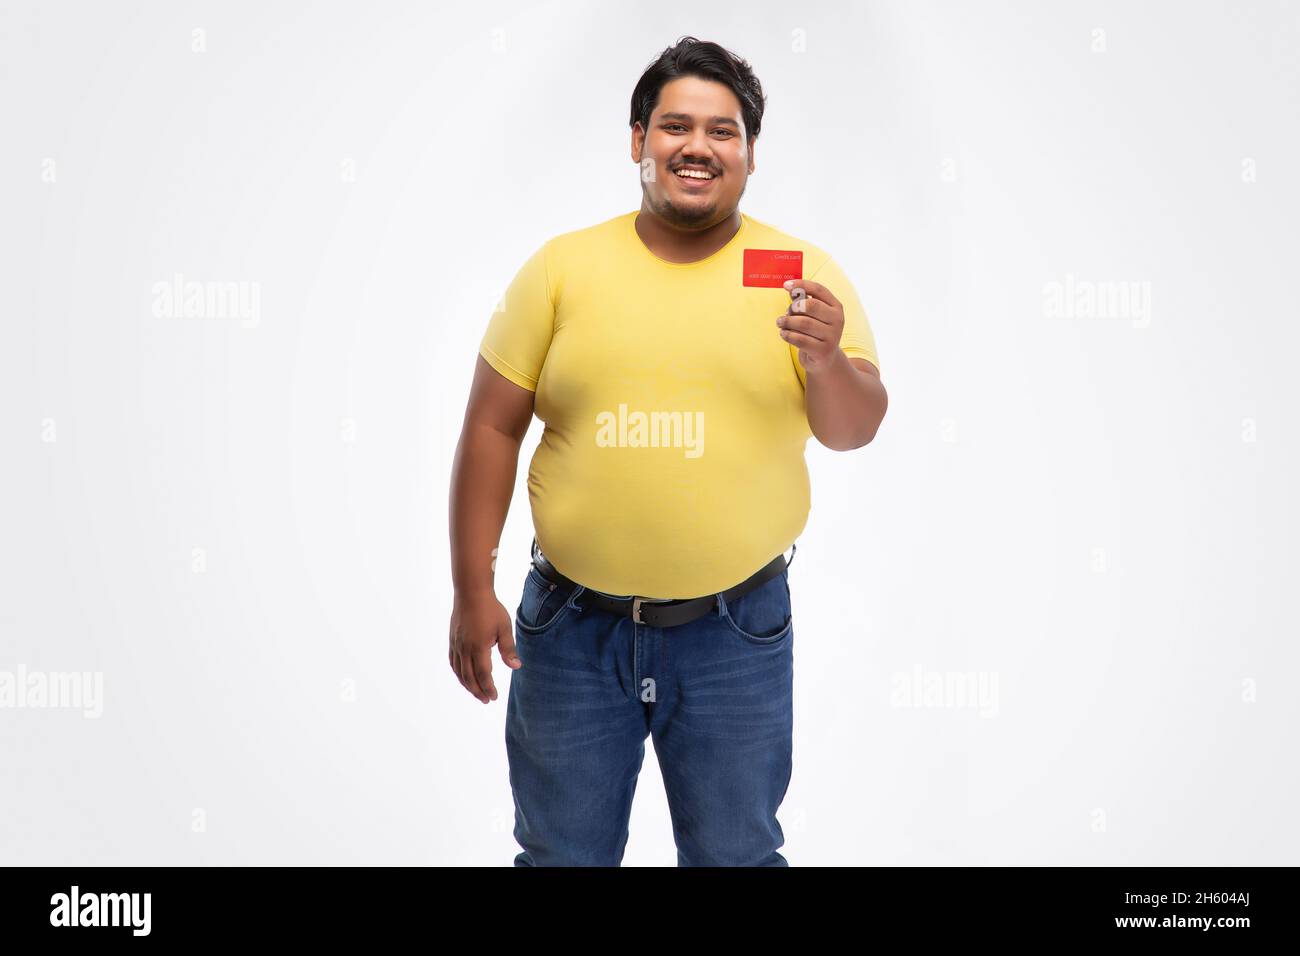 Portrait of a fat man smiling and showing credit card against plain background. Stock Photo